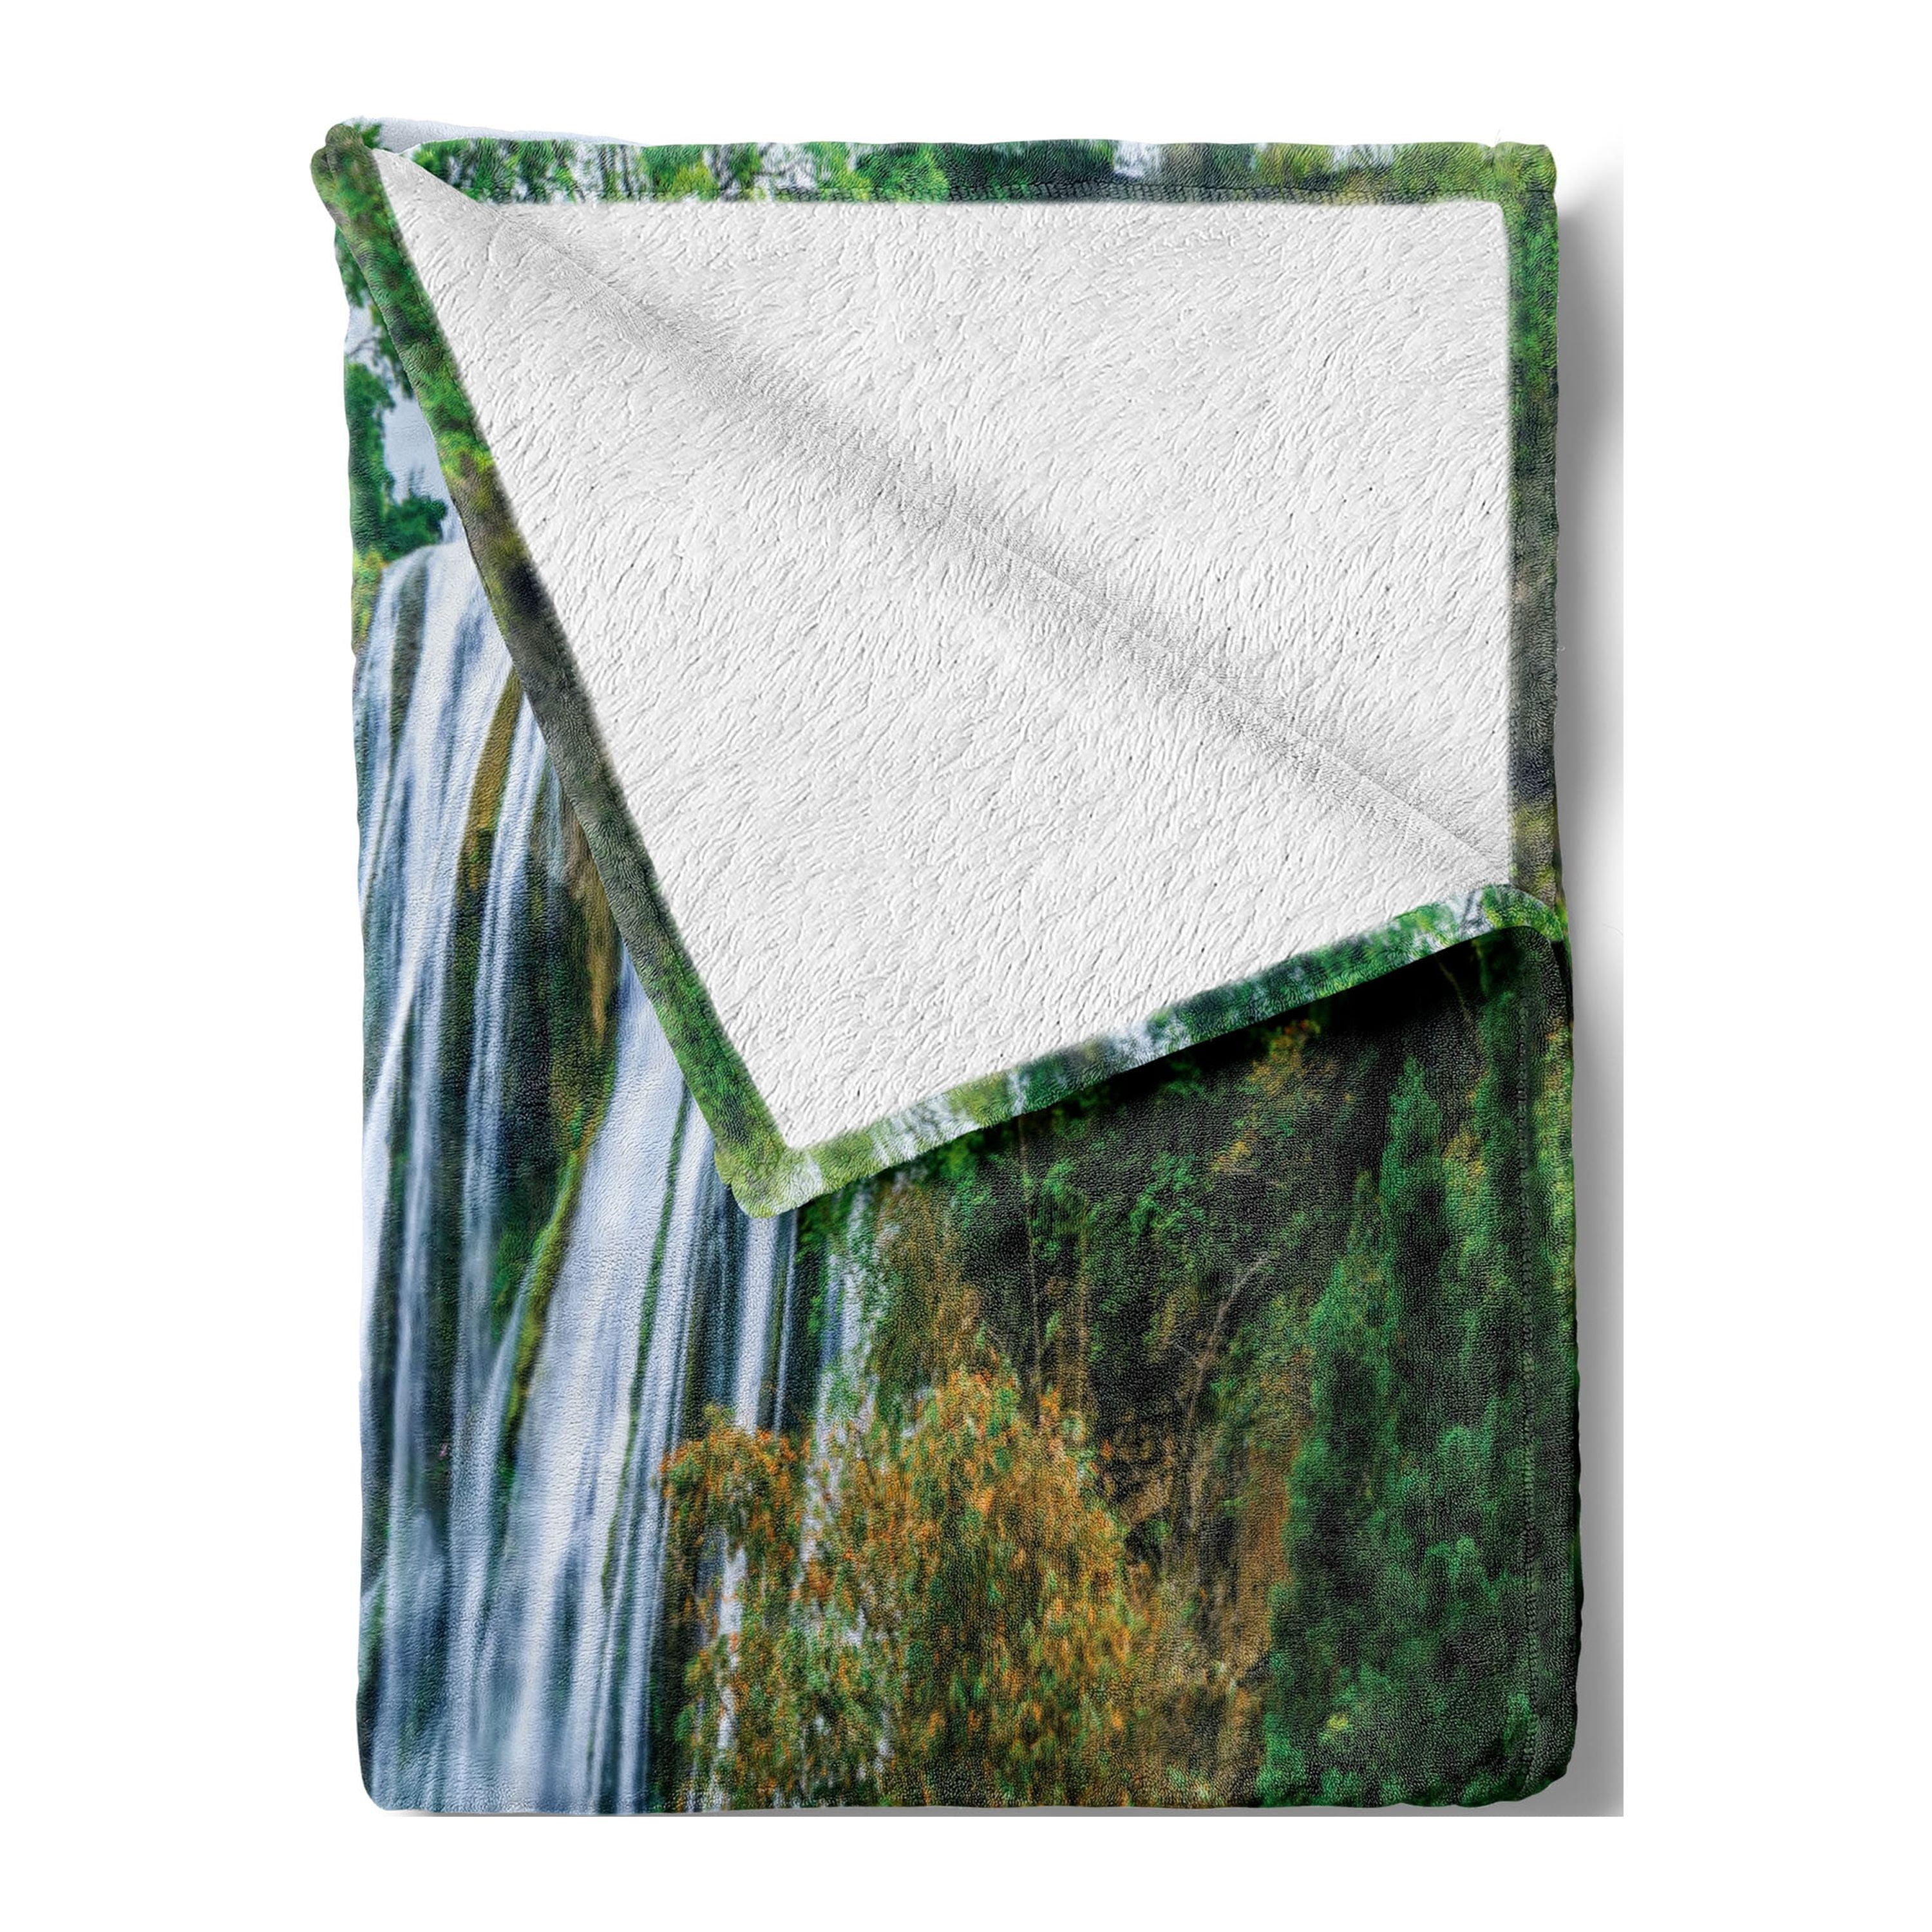 Waterfall Soft Flannel Fleece Blanket, Little Waterfalls Flow on Rock  Stairs Surrounded by Long Plants Earth, Cozy Plush for Indoor and Outdoor  Use, 50 x 60, Brown White and Green, by Ambesonne 